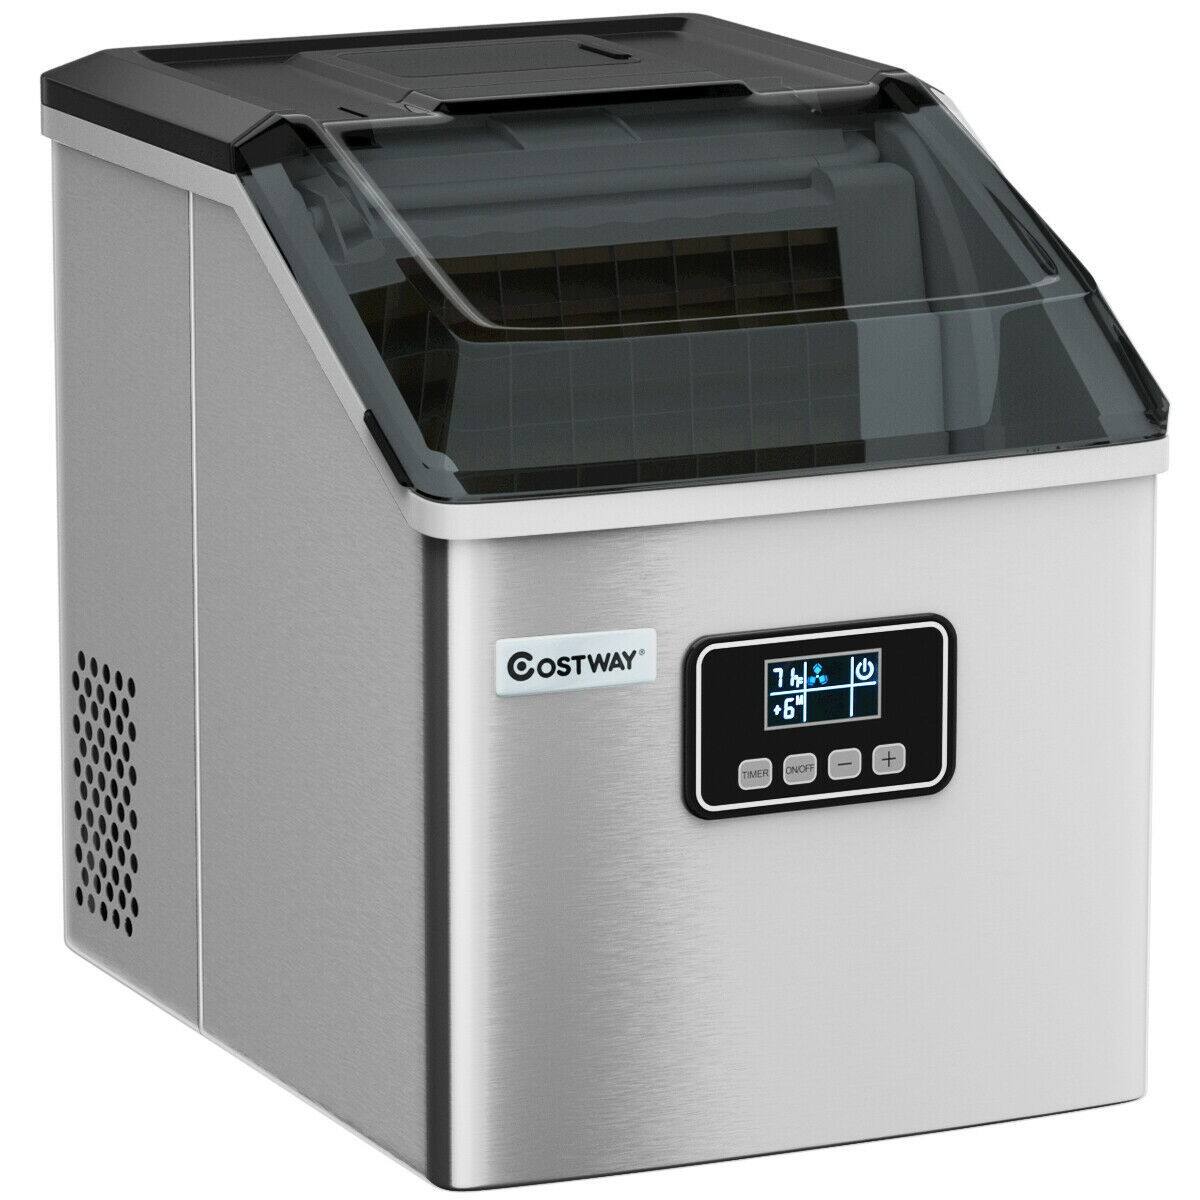 Costway 48 Lbs Stainless Self-Clean Ice Maker with LCD Display for $157.95 + FS